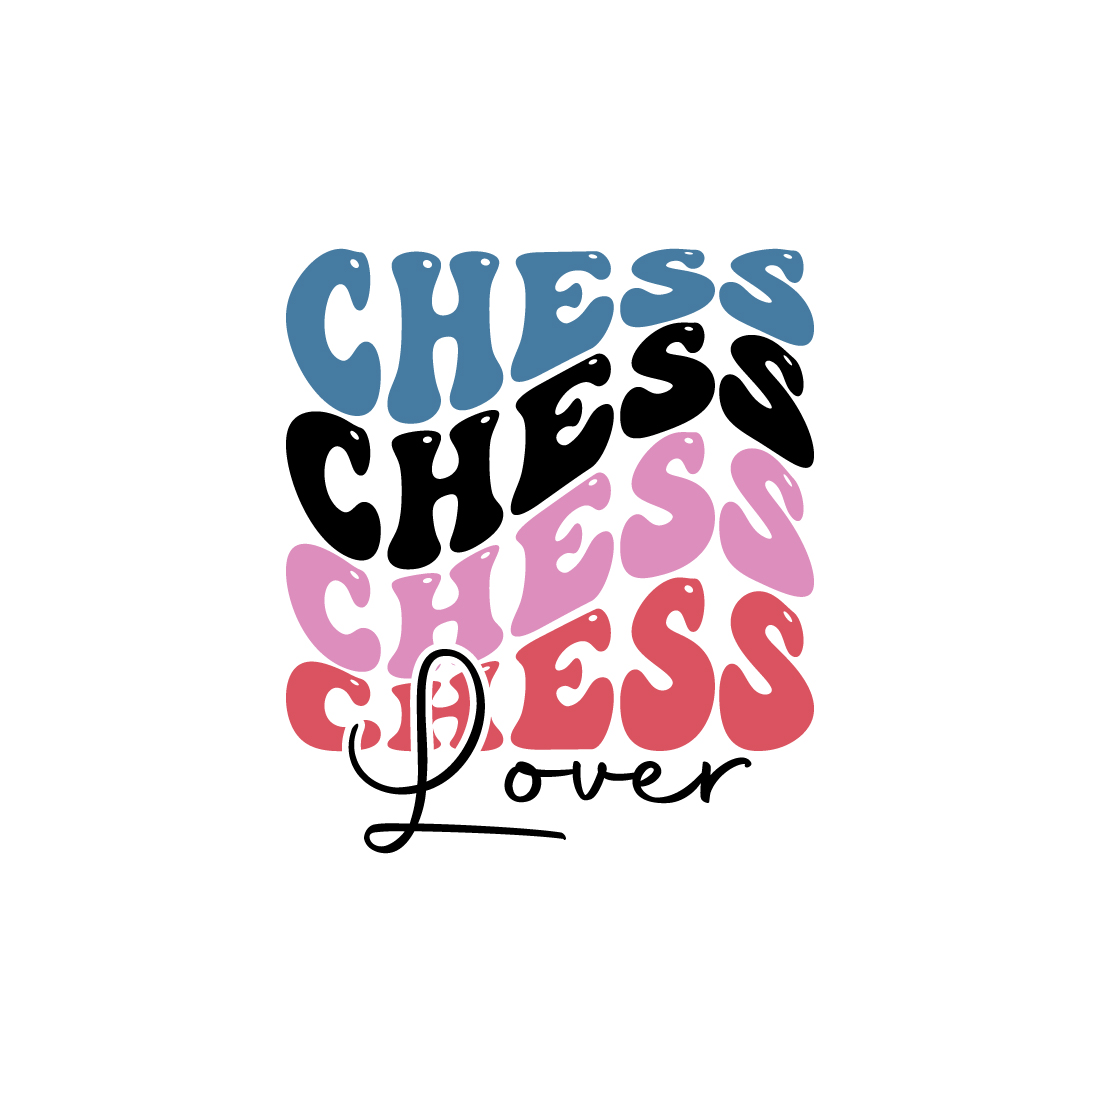 Chess lover indoor game retro typography design for t-shirts, cards, frame artwork, phone cases, bags, mugs, stickers, tumblers, print, etc cover image.